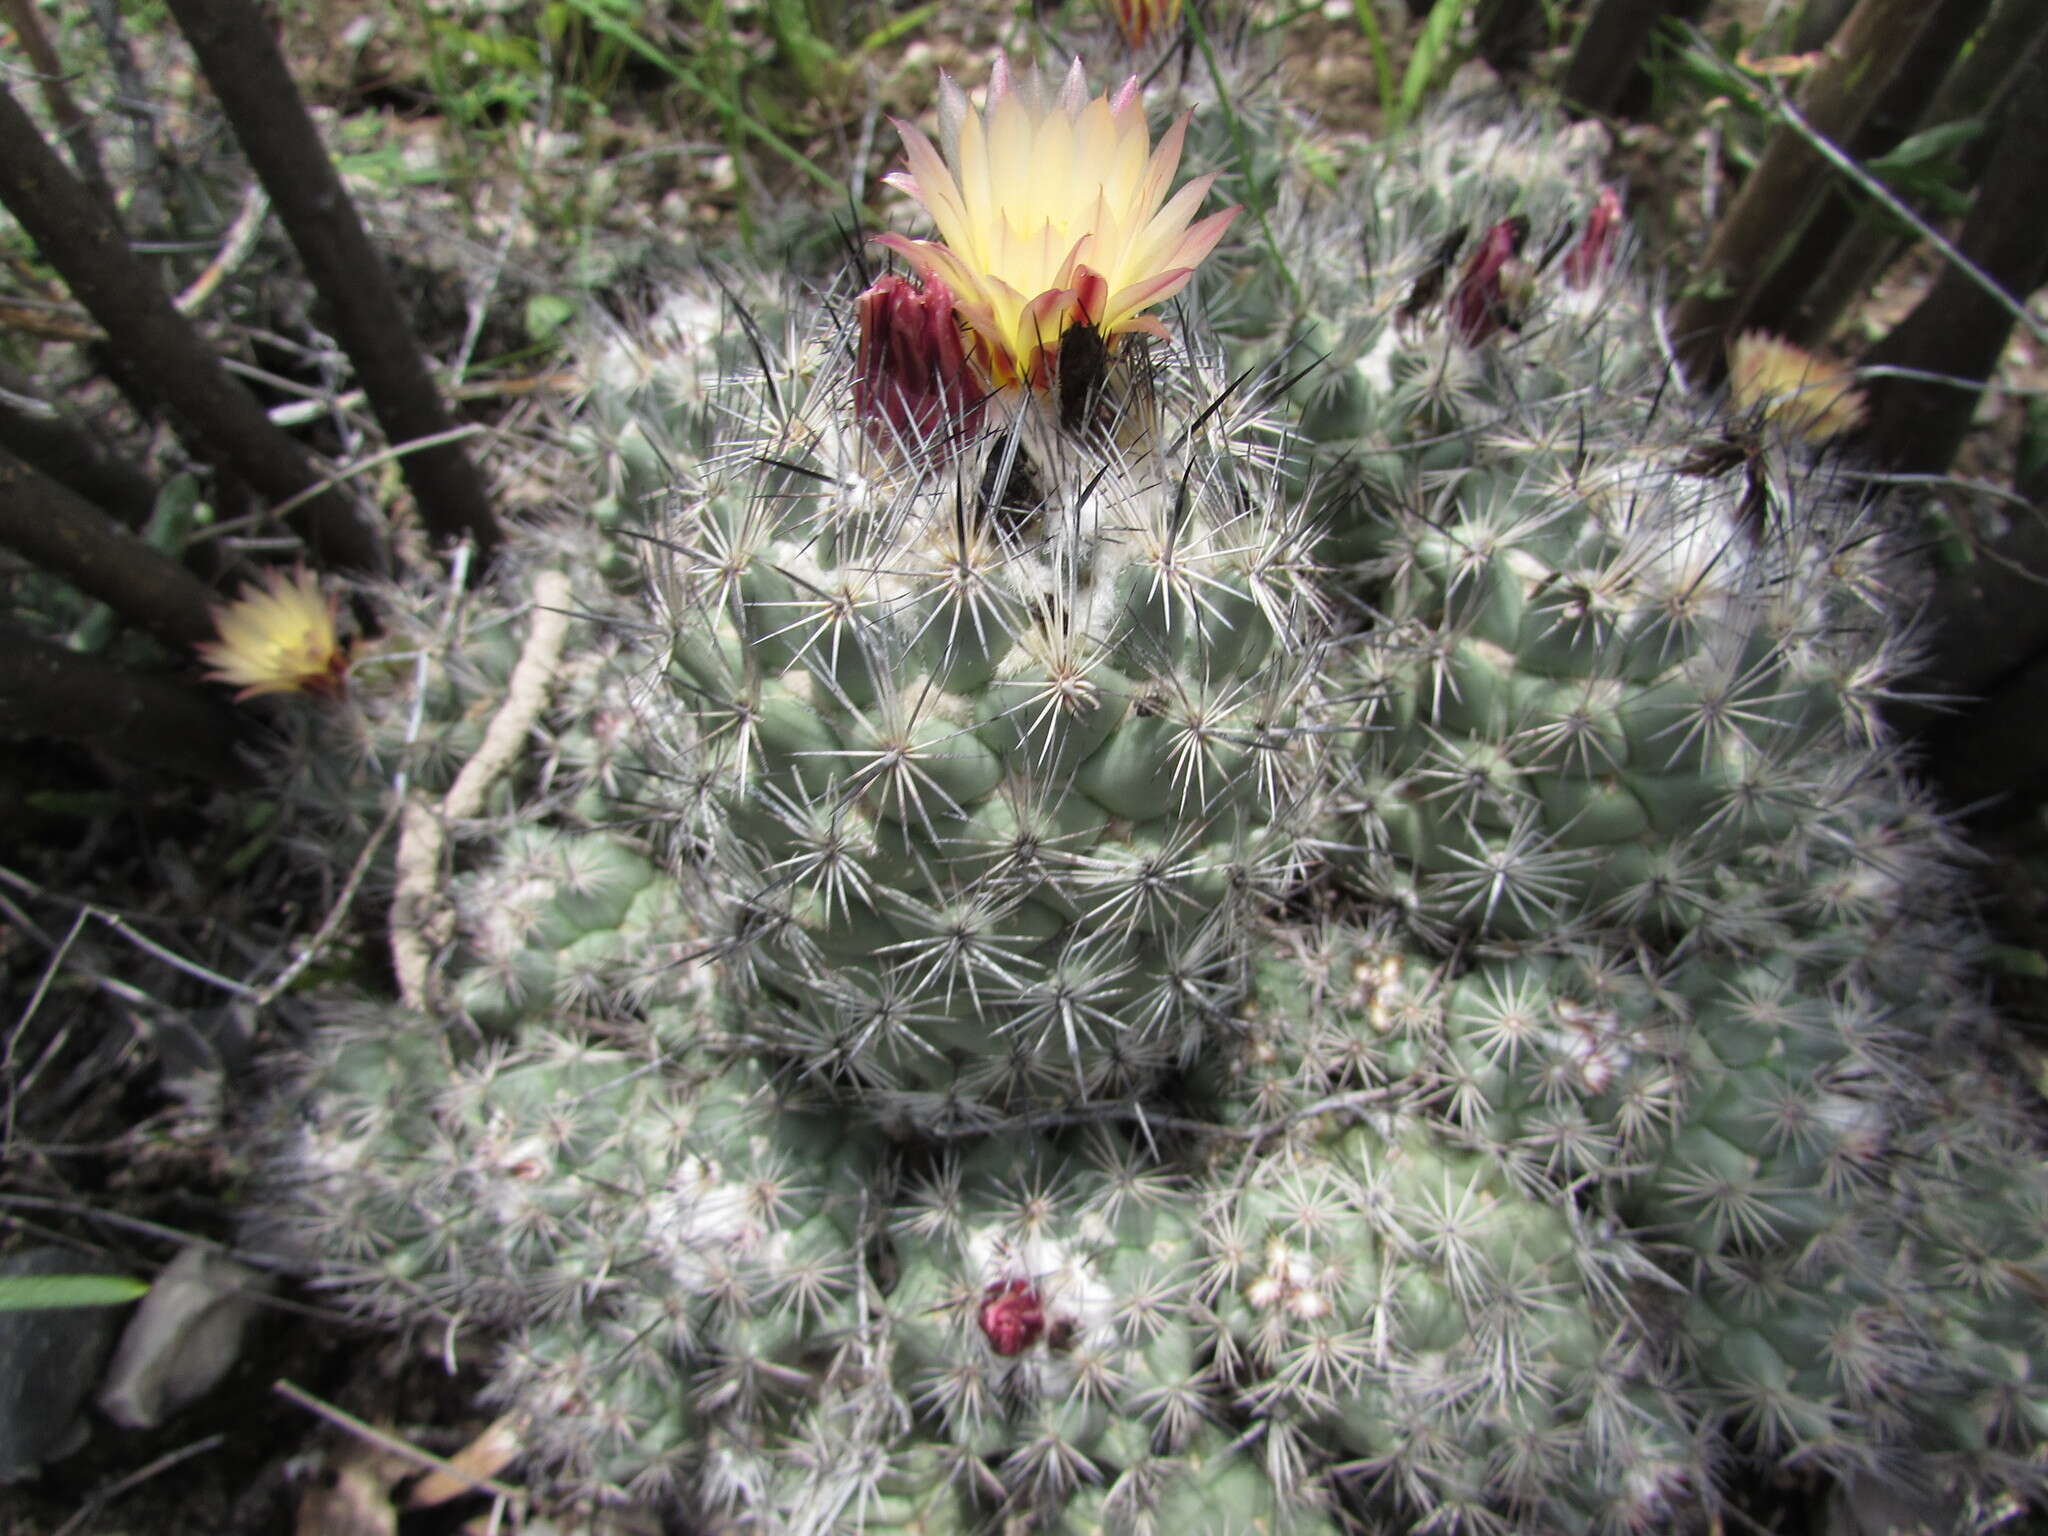 Image of Coryphantha durangensis subsp. cuencamensis (L. Bremer) Dicht & A. Lüthy